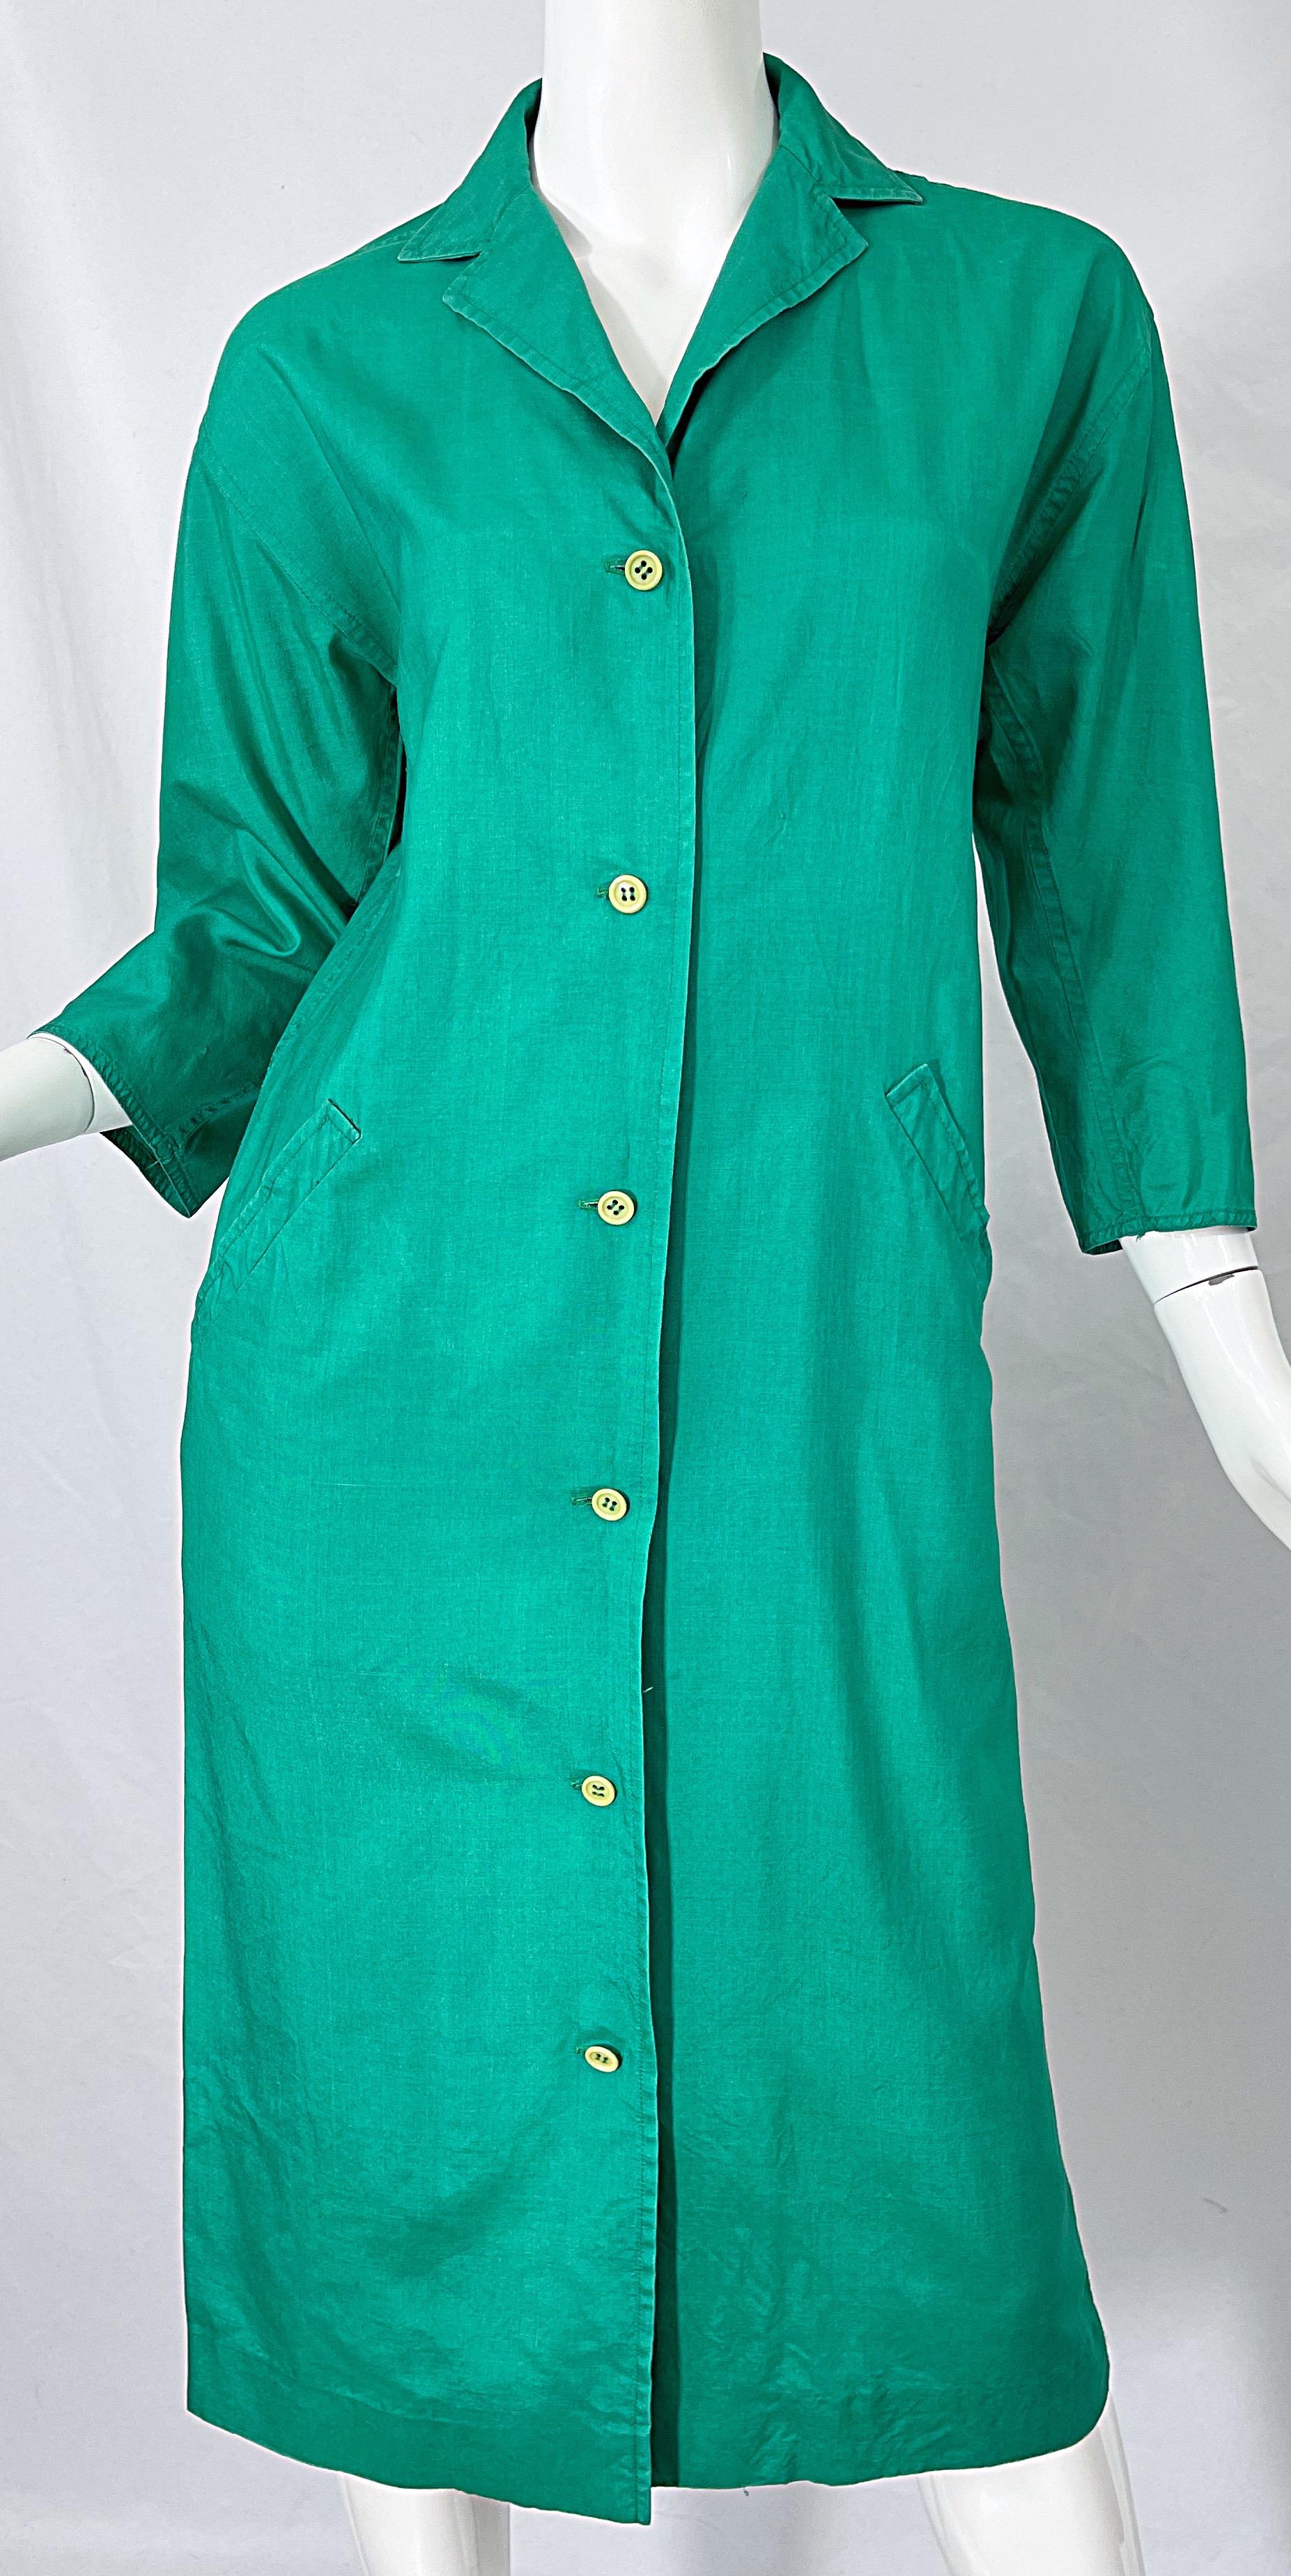 1970s Halston Kelly Green Silk 3/4 Sleeves Vintage 70s Shirt Dress w/ Pockets For Sale 4